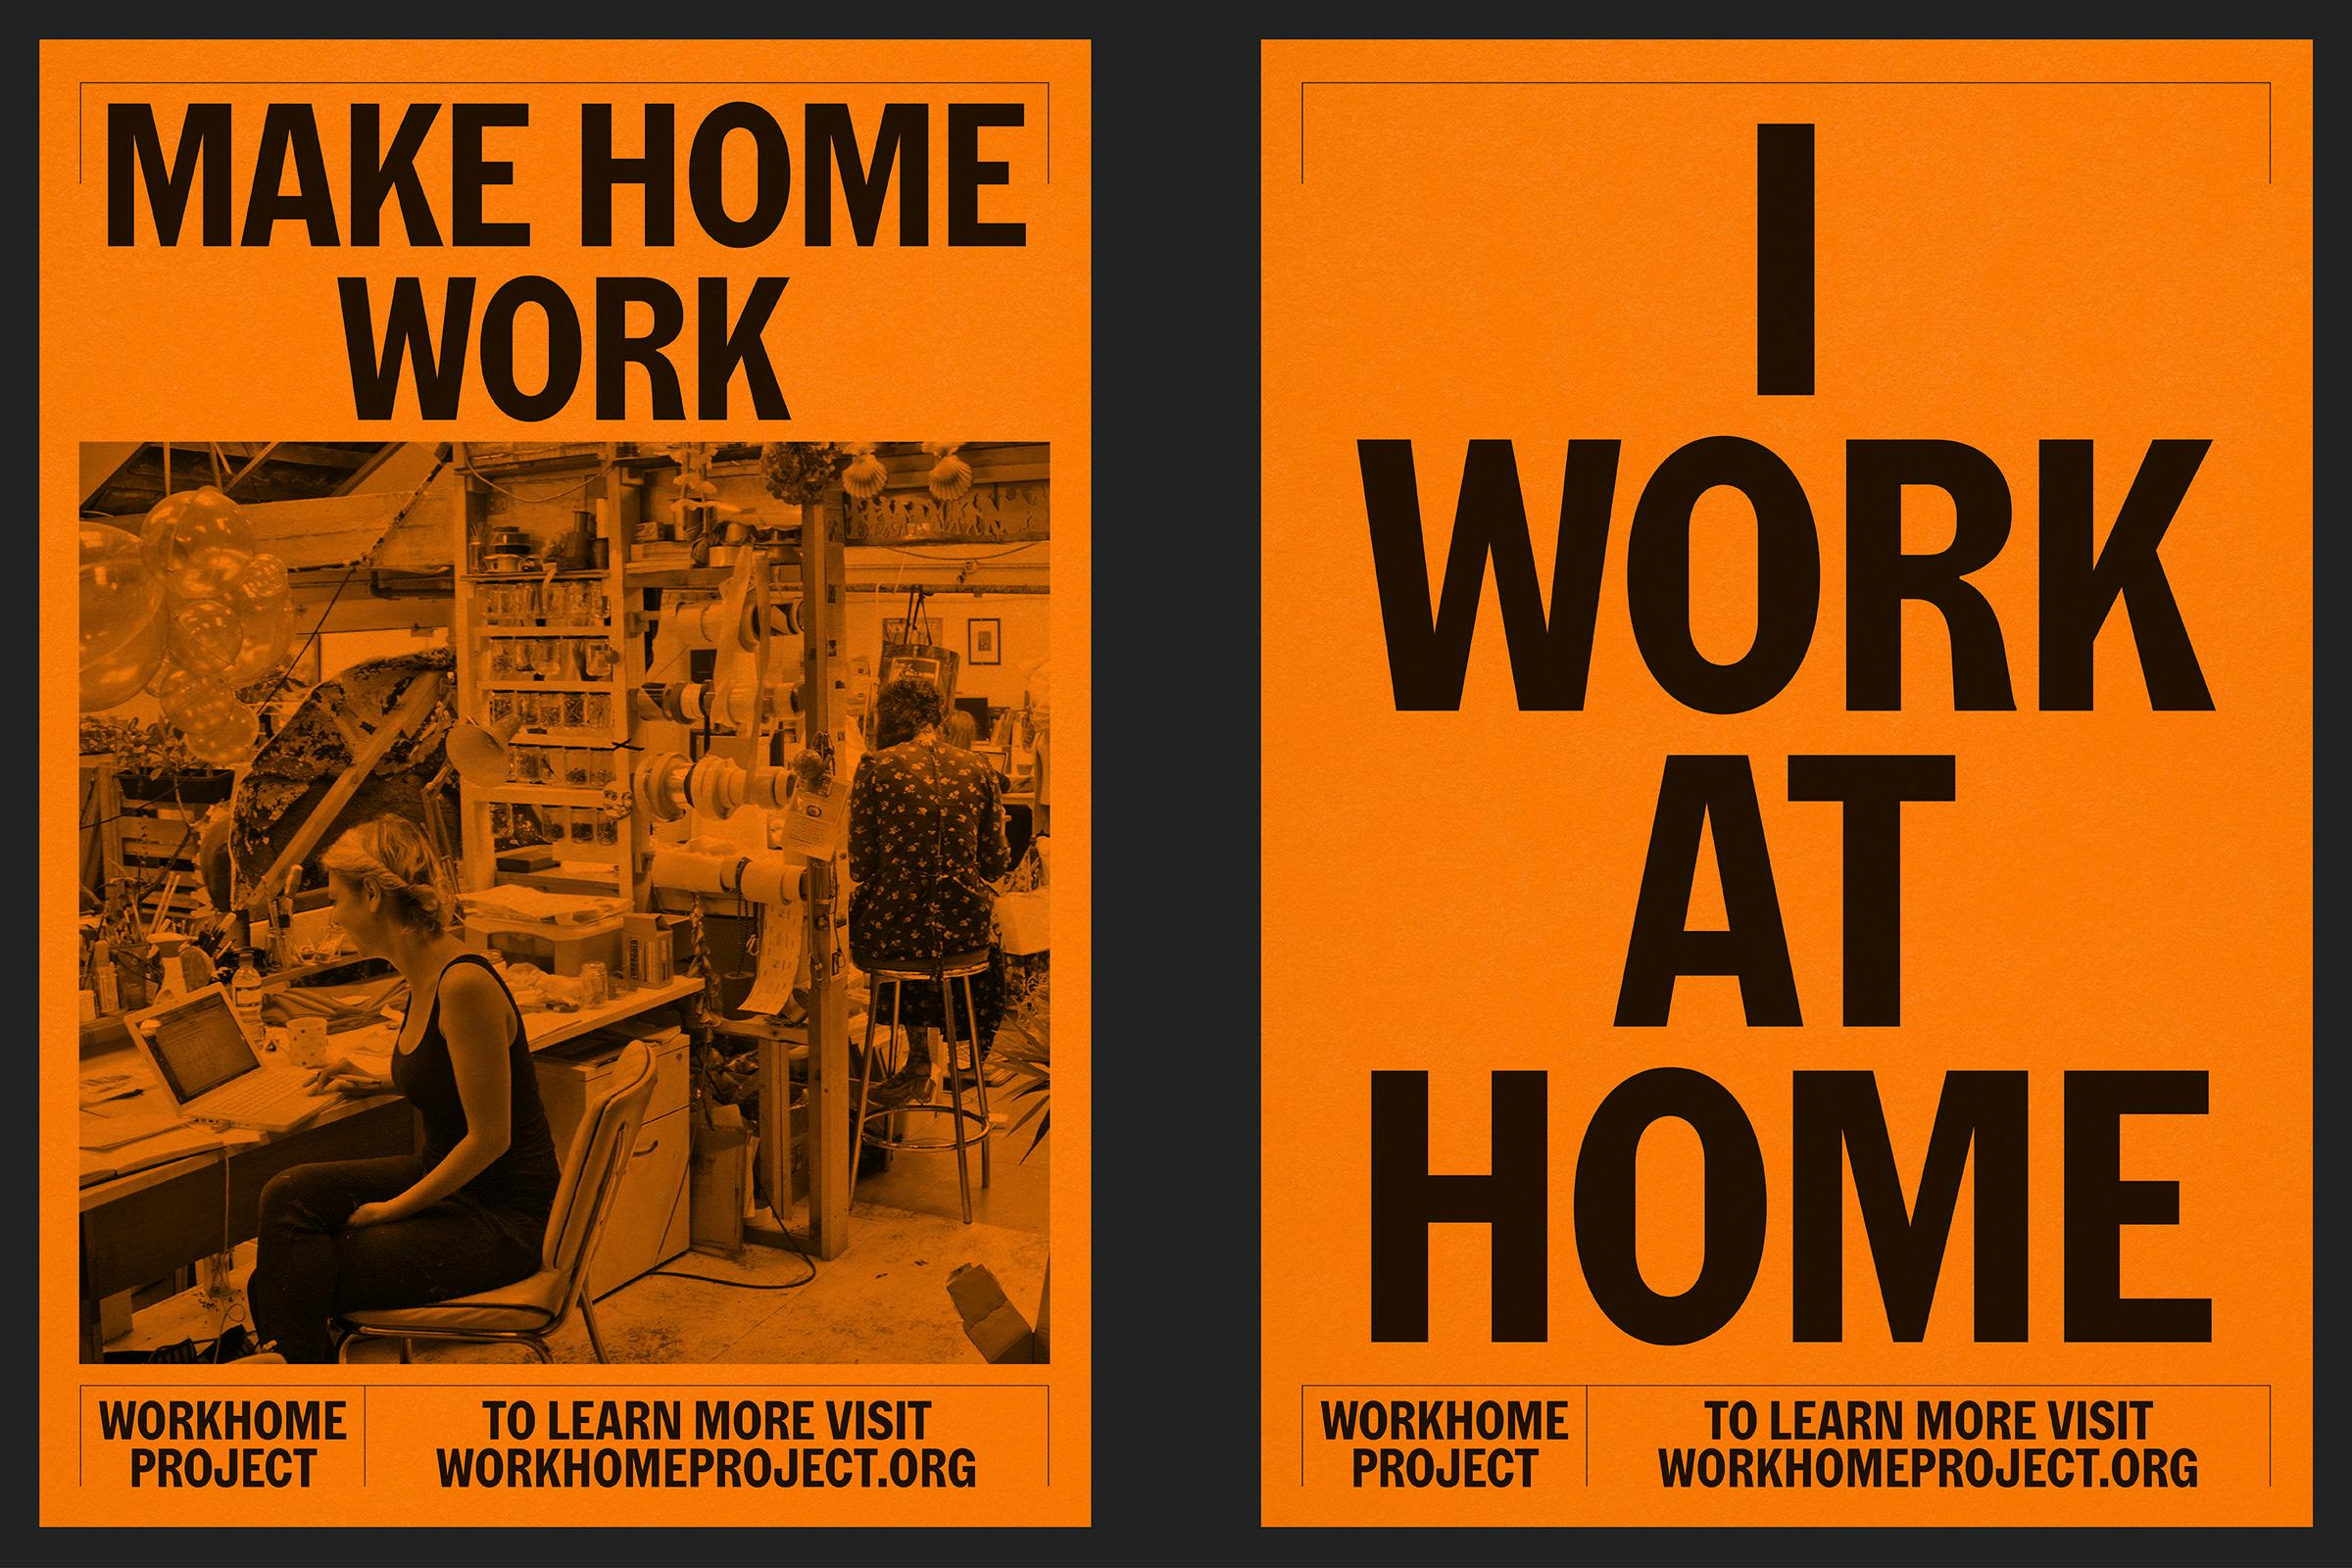 Workhome Project, identity, Graphic Design by Wolfe Hall